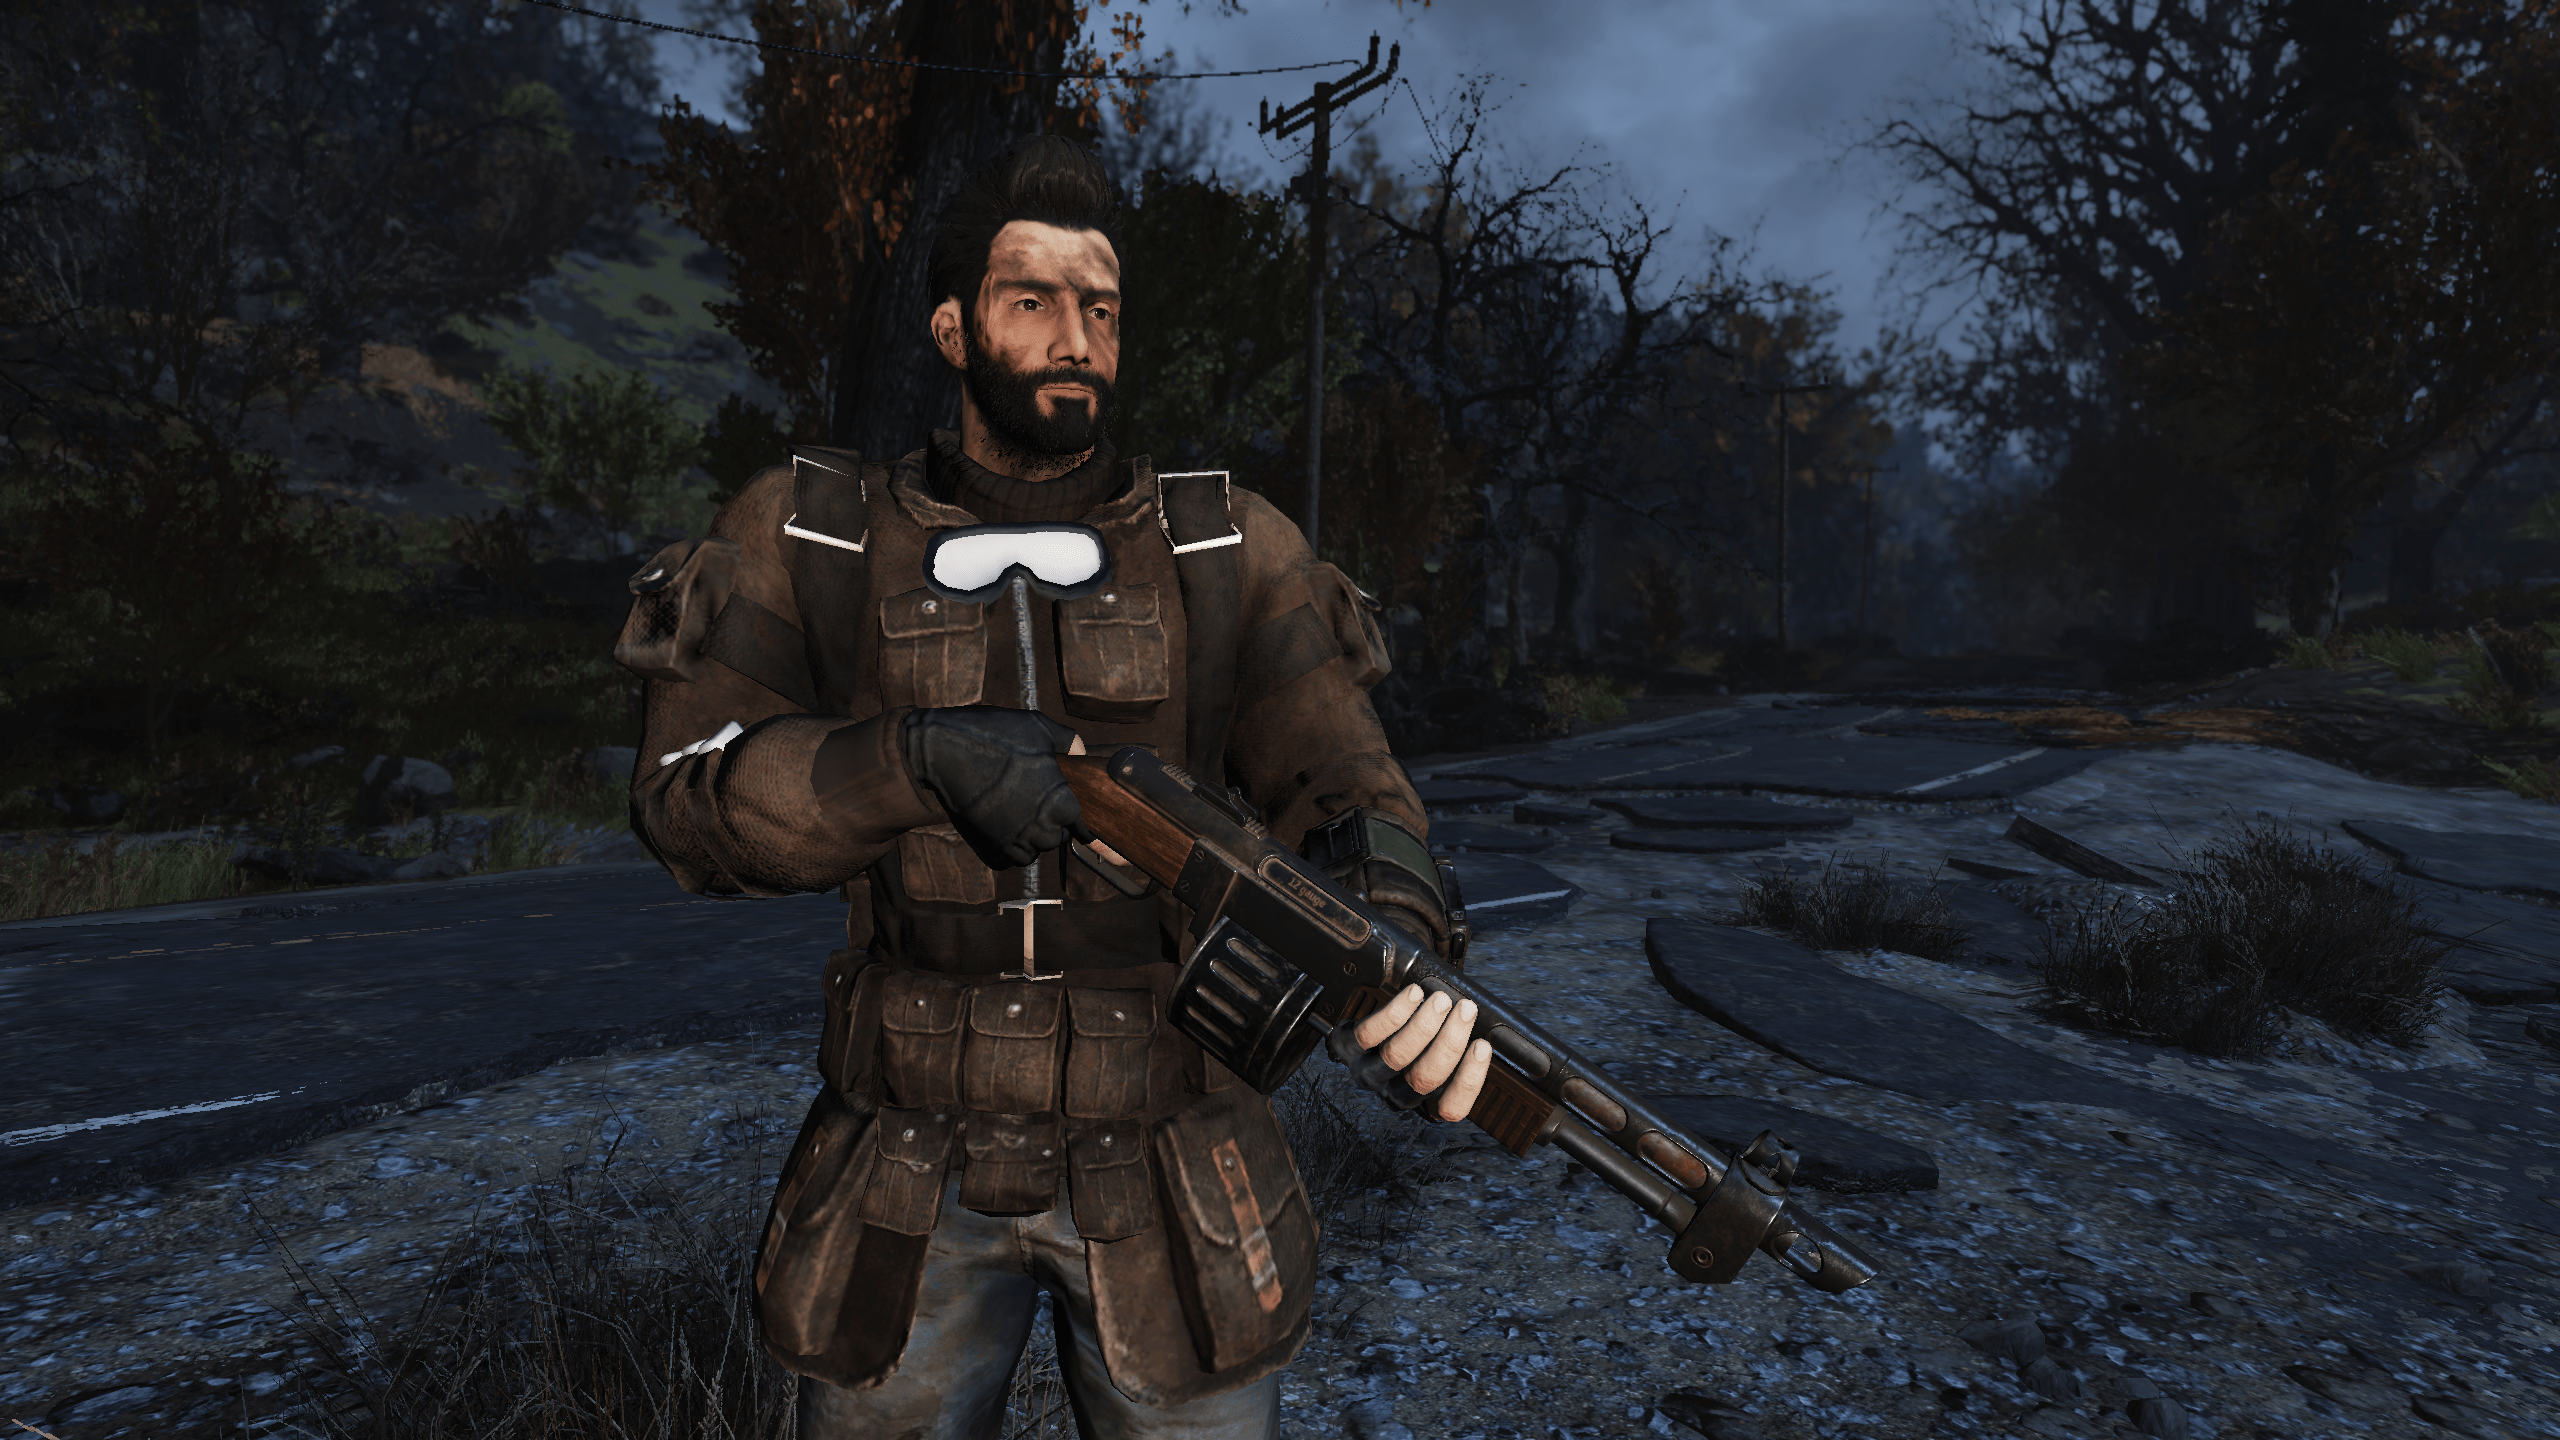 Bring a classic piece of Fallout 3 apparel into Fallout 76 for your adventu...